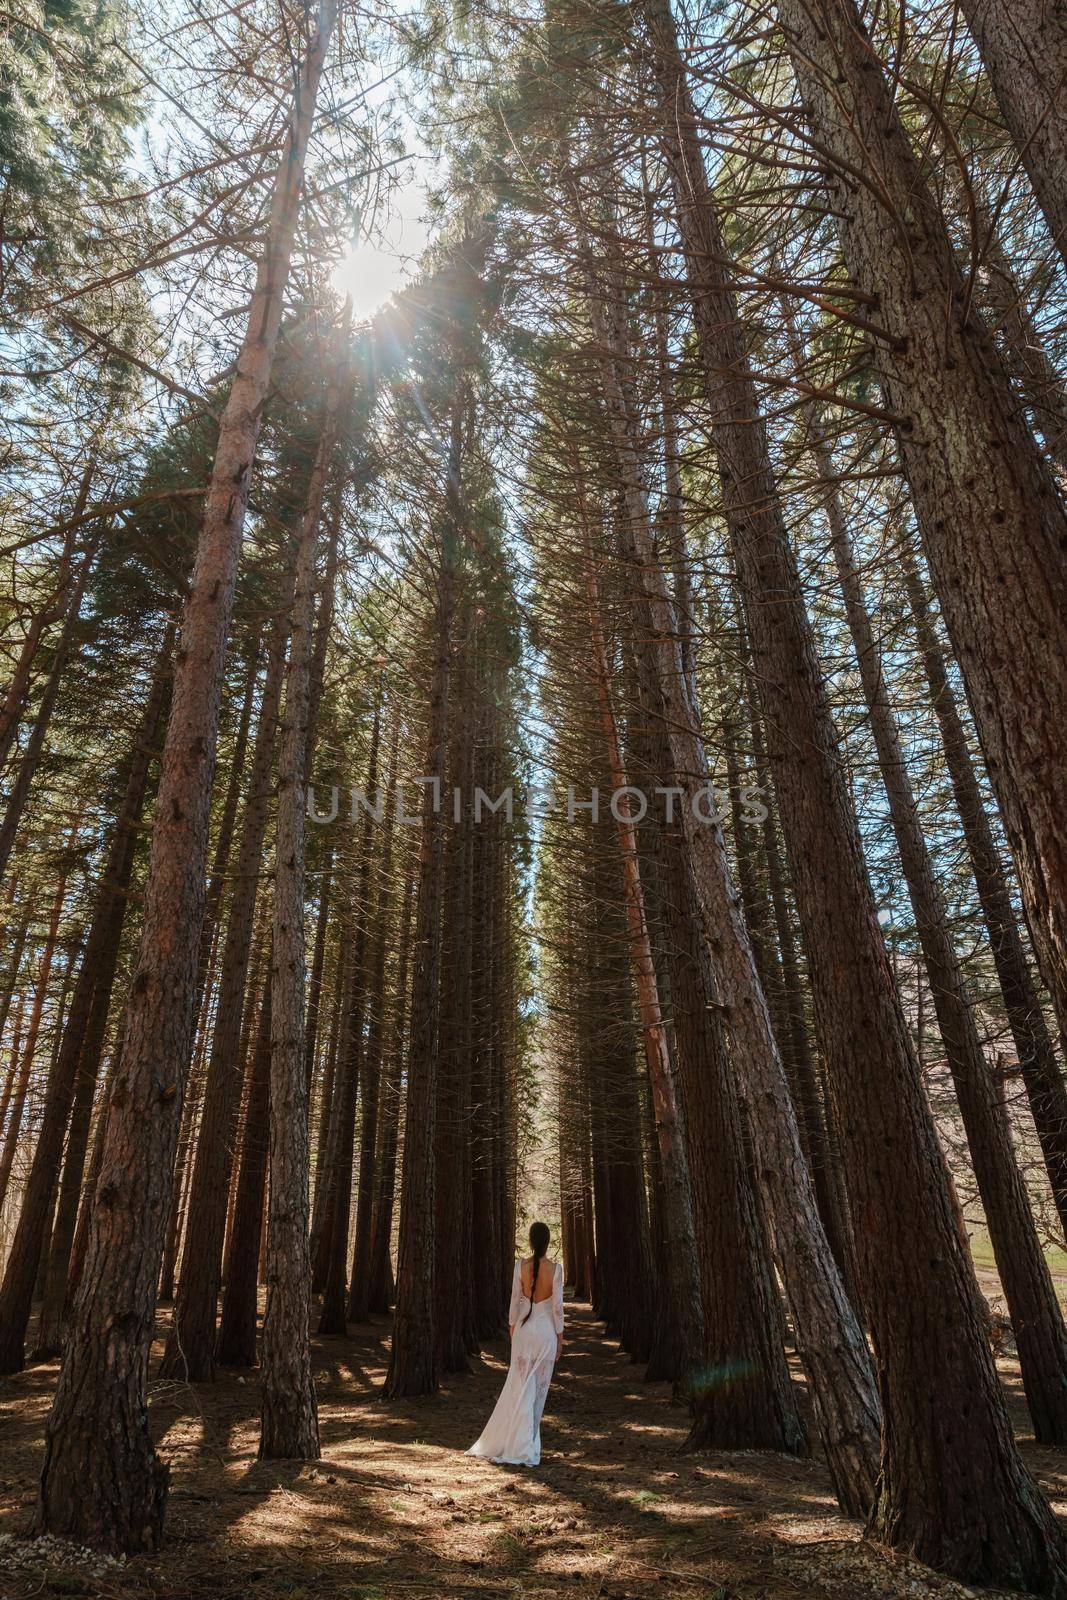 A girl in a white dress and a long braid travels alone through the forest of tall Sequoiadendron giganteum, rising into the sky on a sunny day.